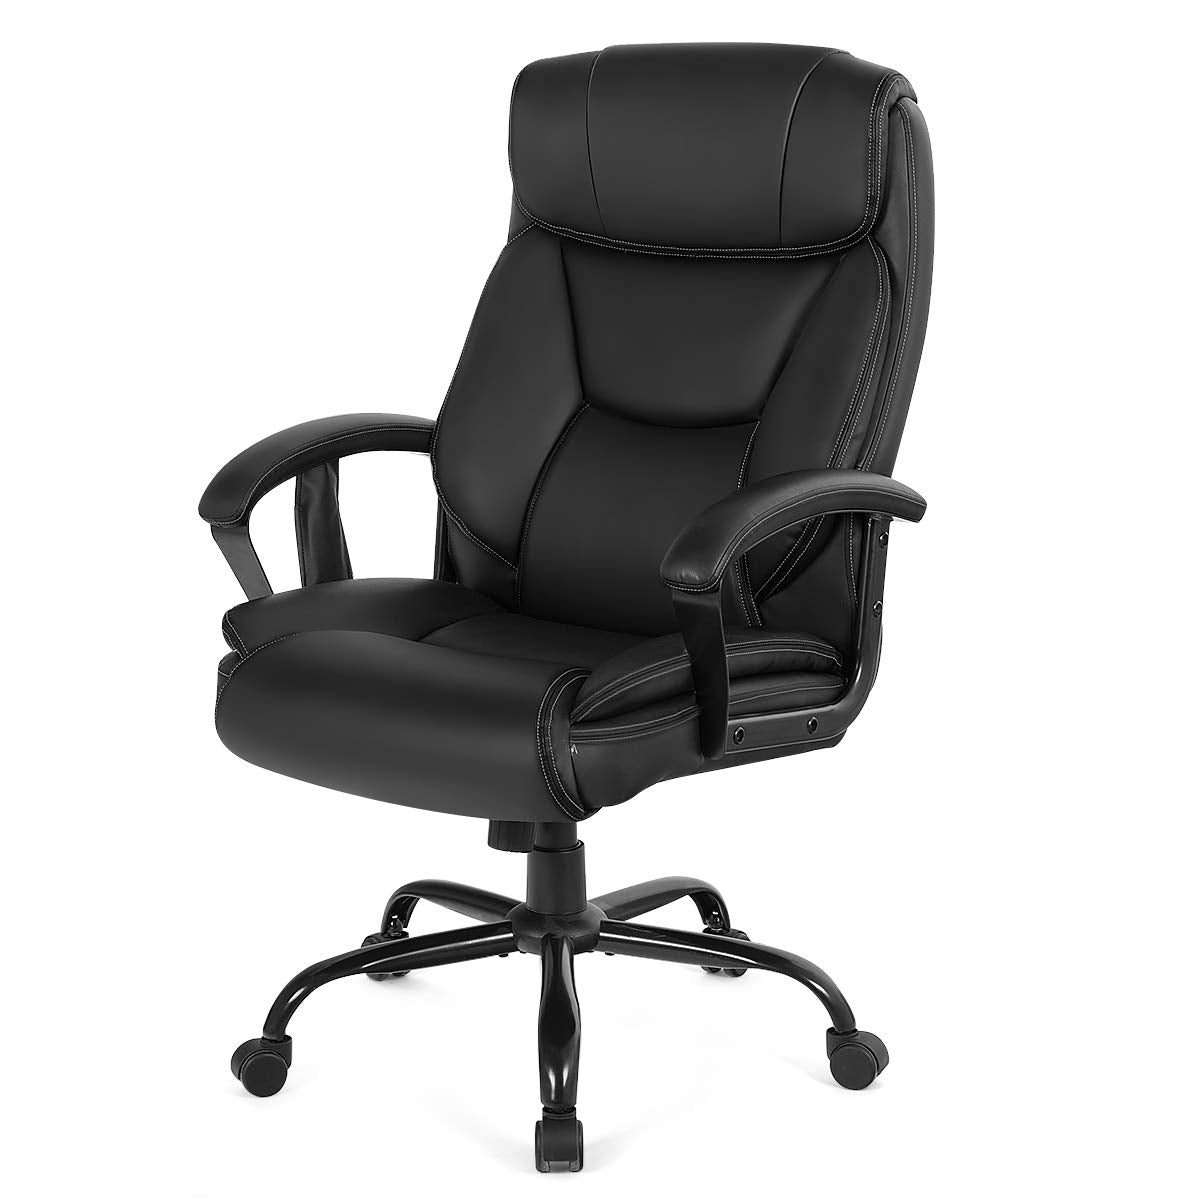 Giantex 500 lbs Big and Tall Office Chair, Massage Executive Chair w/ 6 Vibrating Points